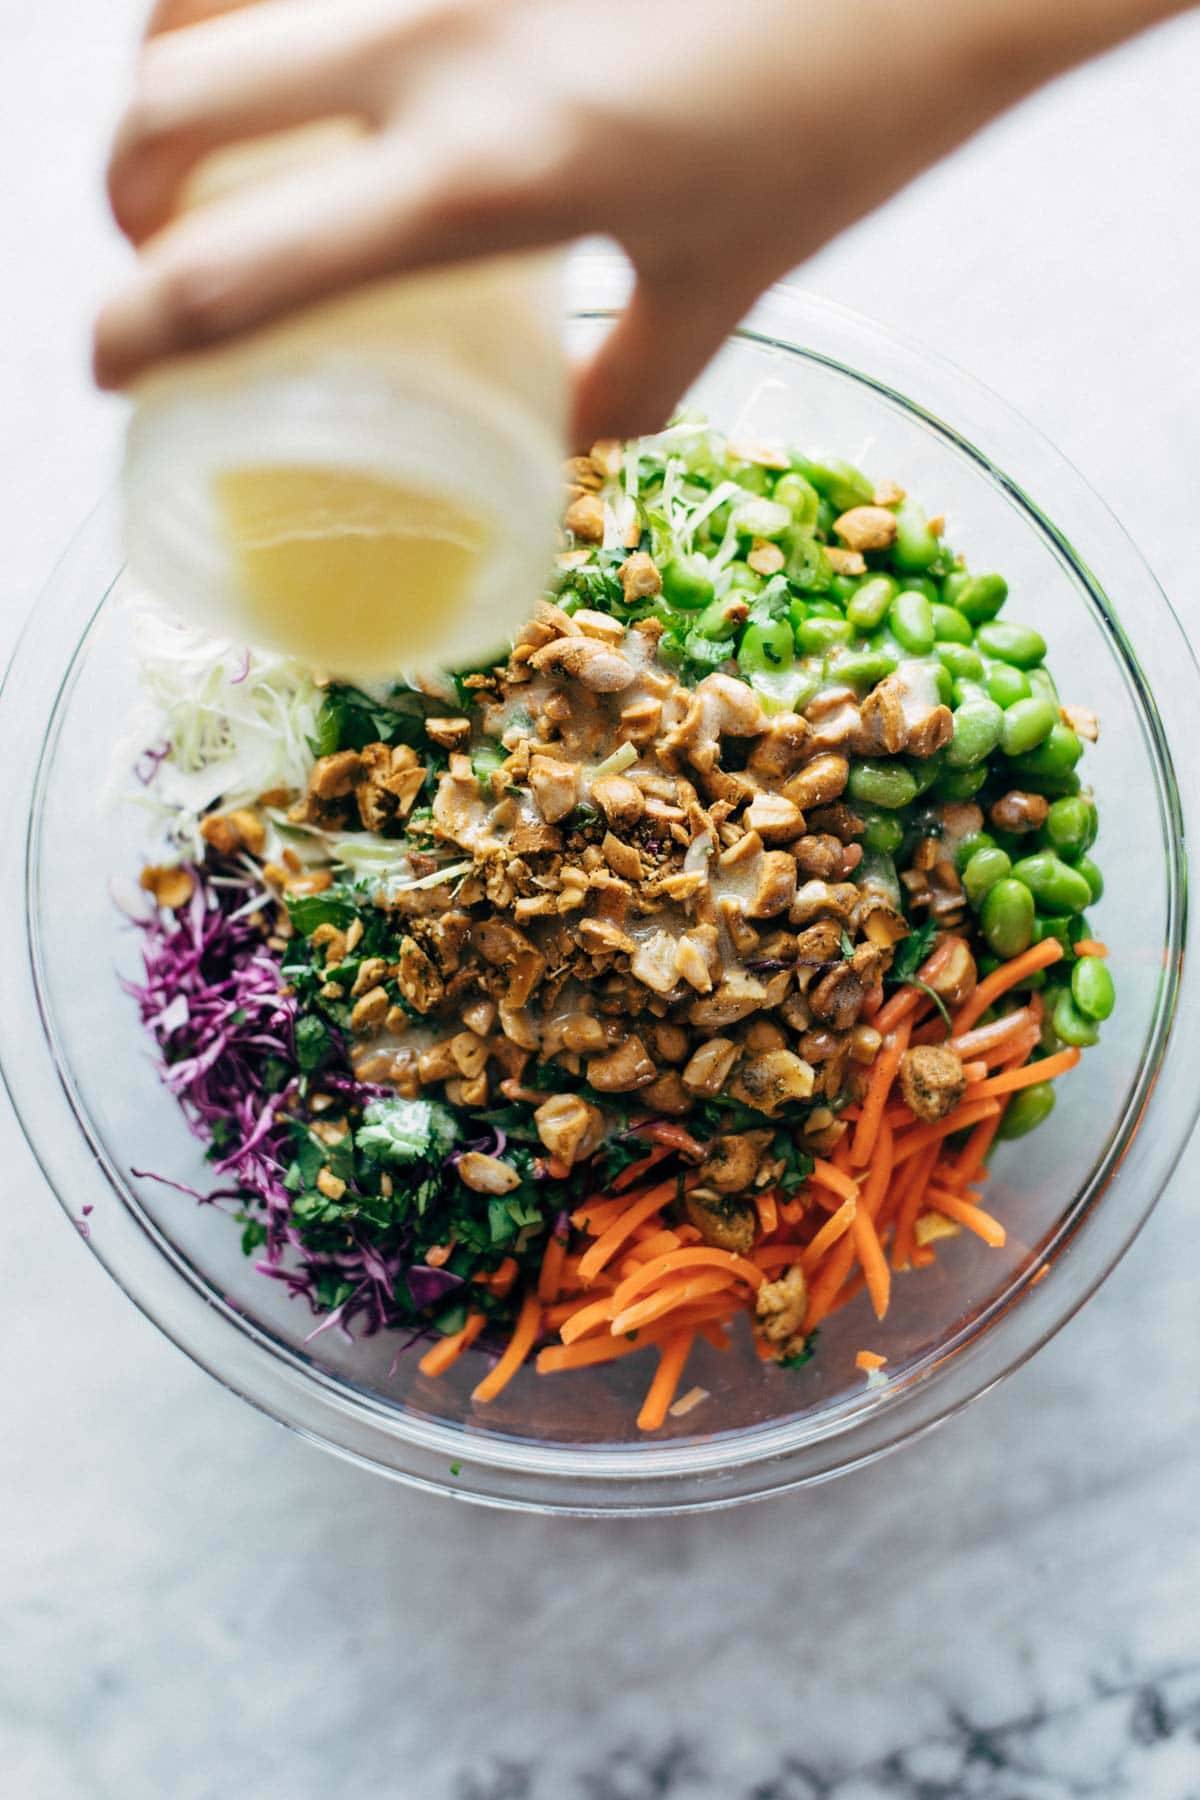 Pouring dressing on Cashew Crunch Salad.